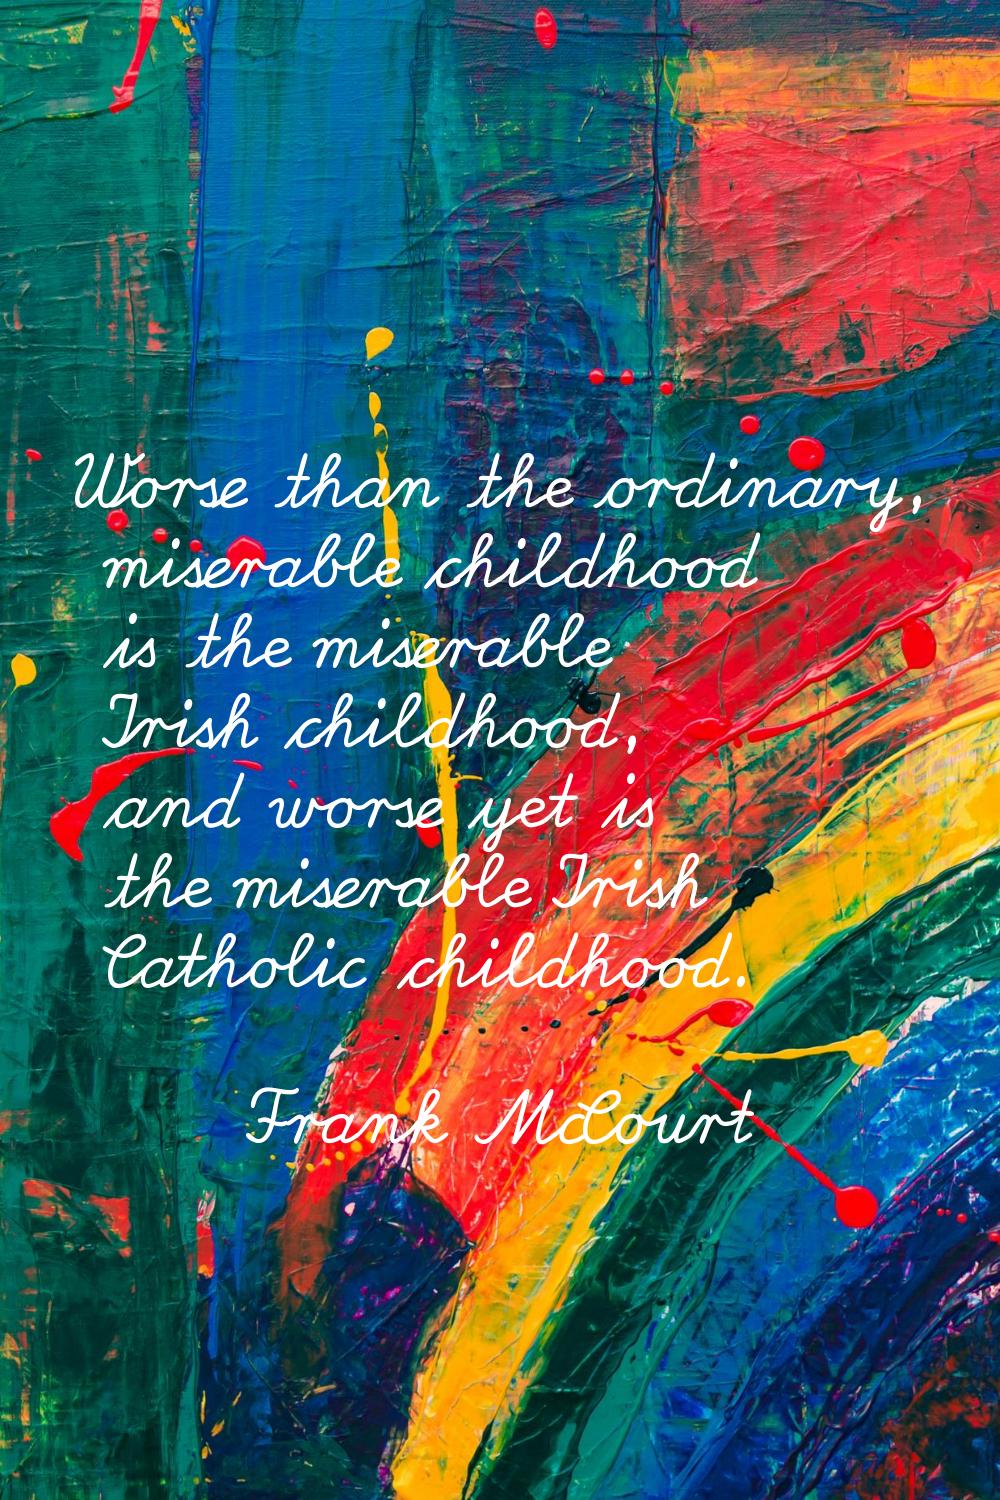 Worse than the ordinary, miserable childhood is the miserable Irish childhood, and worse yet is the